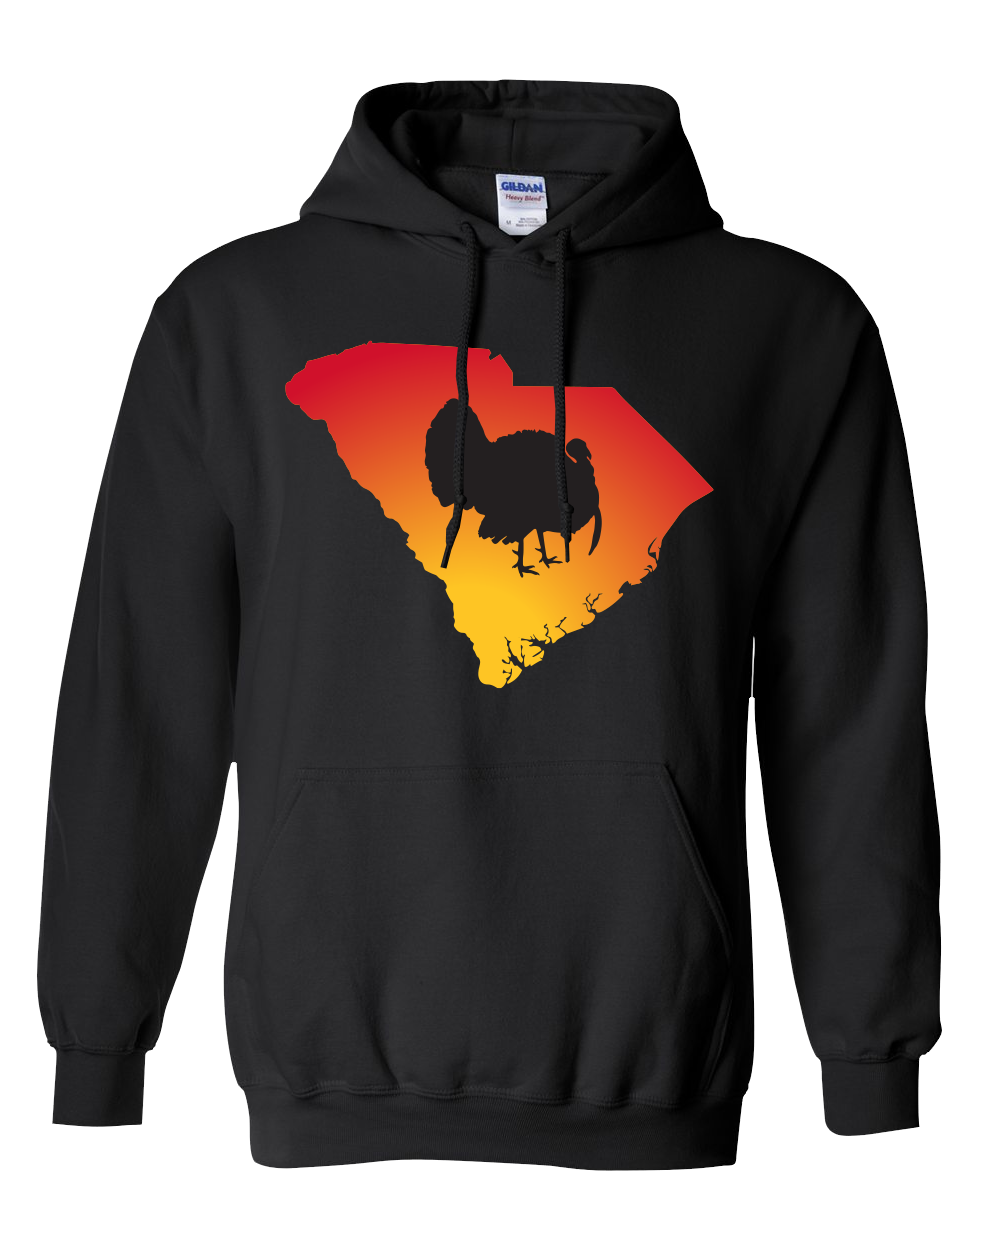 Pullover Hooded Sweatshirt South Carolina Black Turkey Vibrant Design High Quality Tight Knit Ring Spun Low Maintenance Cotton Printed With The Newest Available Color Transfer Technology